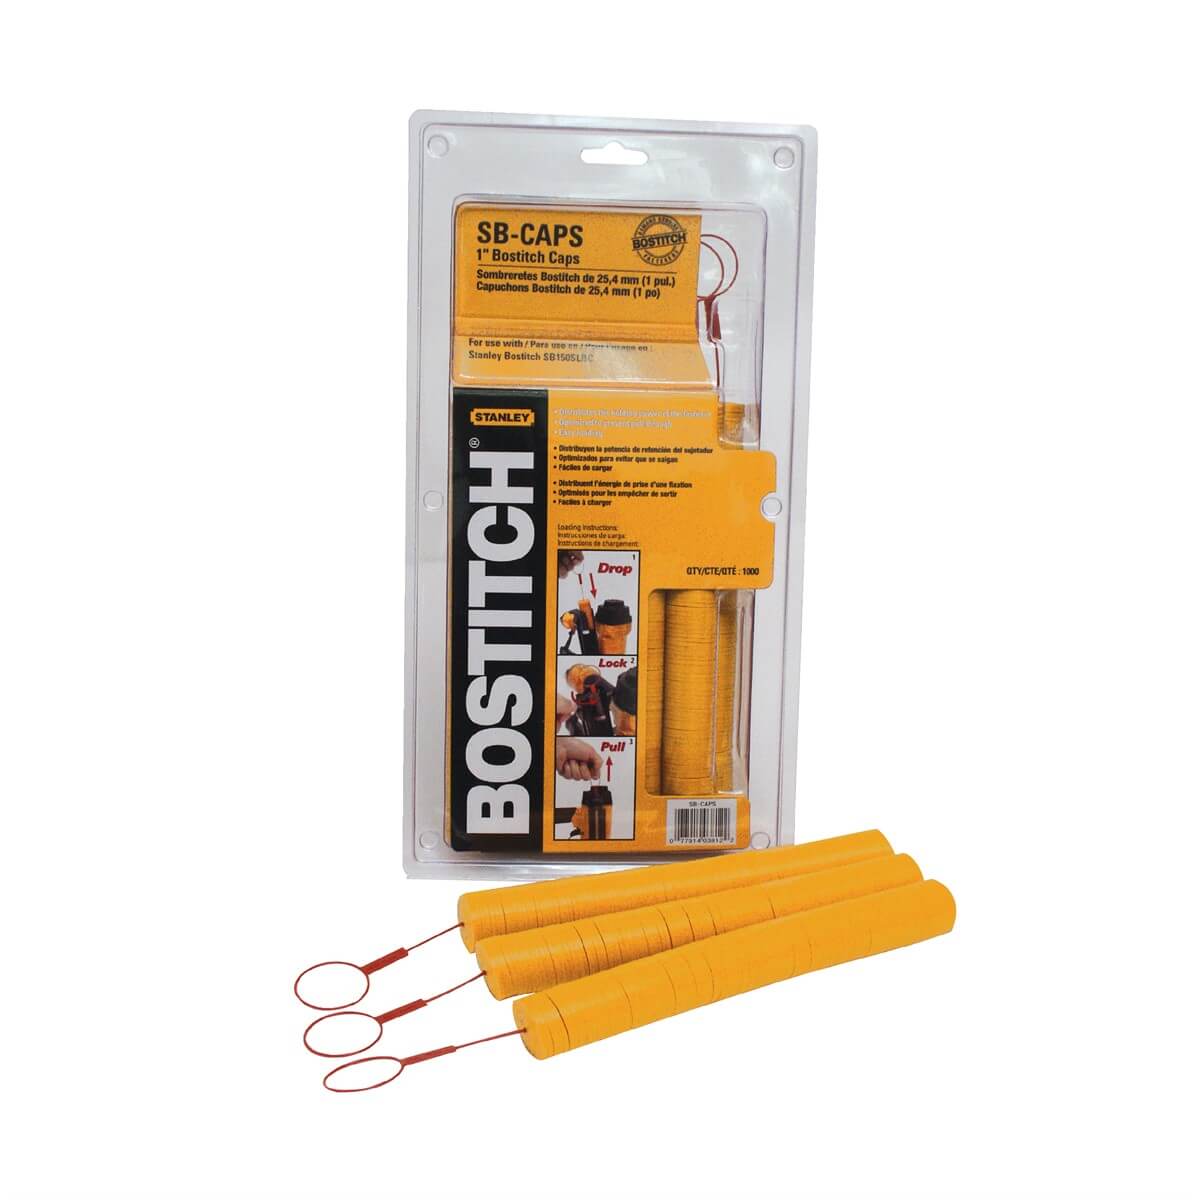 BOSTITCH SB-CAPS 1000 Caps for Cap Stapler and Nailer - wise-line-tools